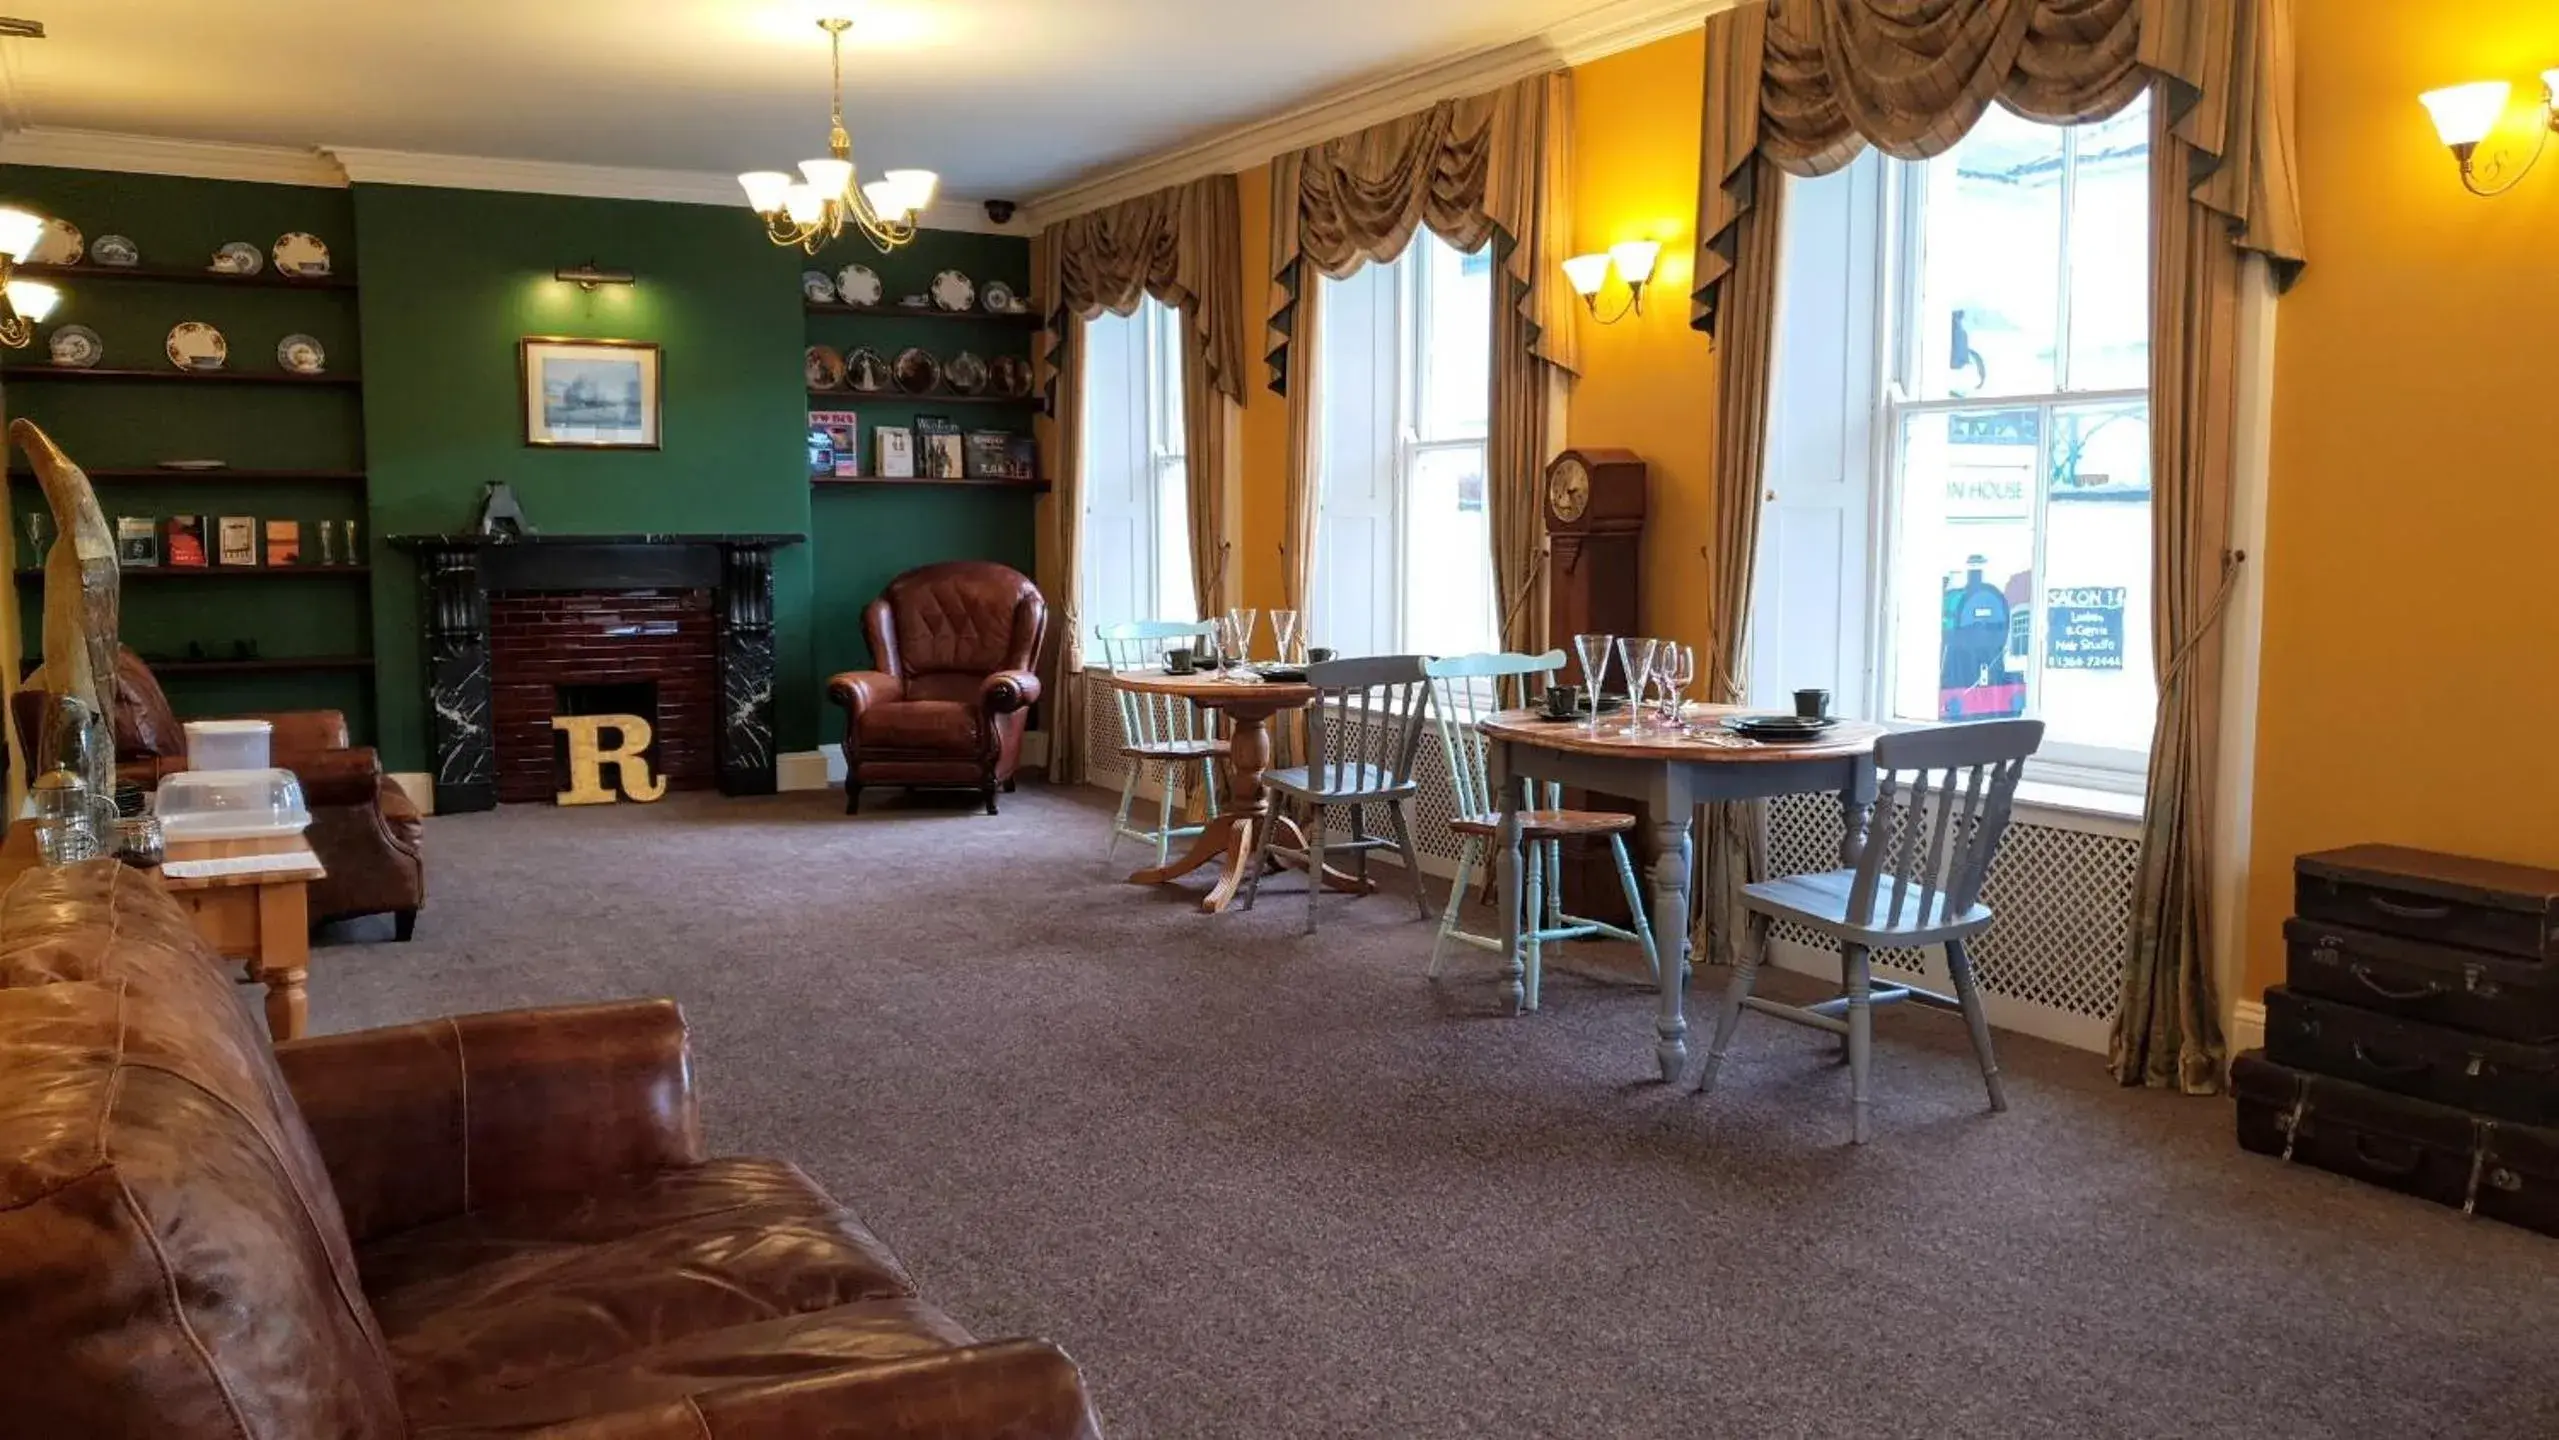 Communal lounge/ TV room, Restaurant/Places to Eat in Station House, Dartmoor and Coast located, Village centre Hotel